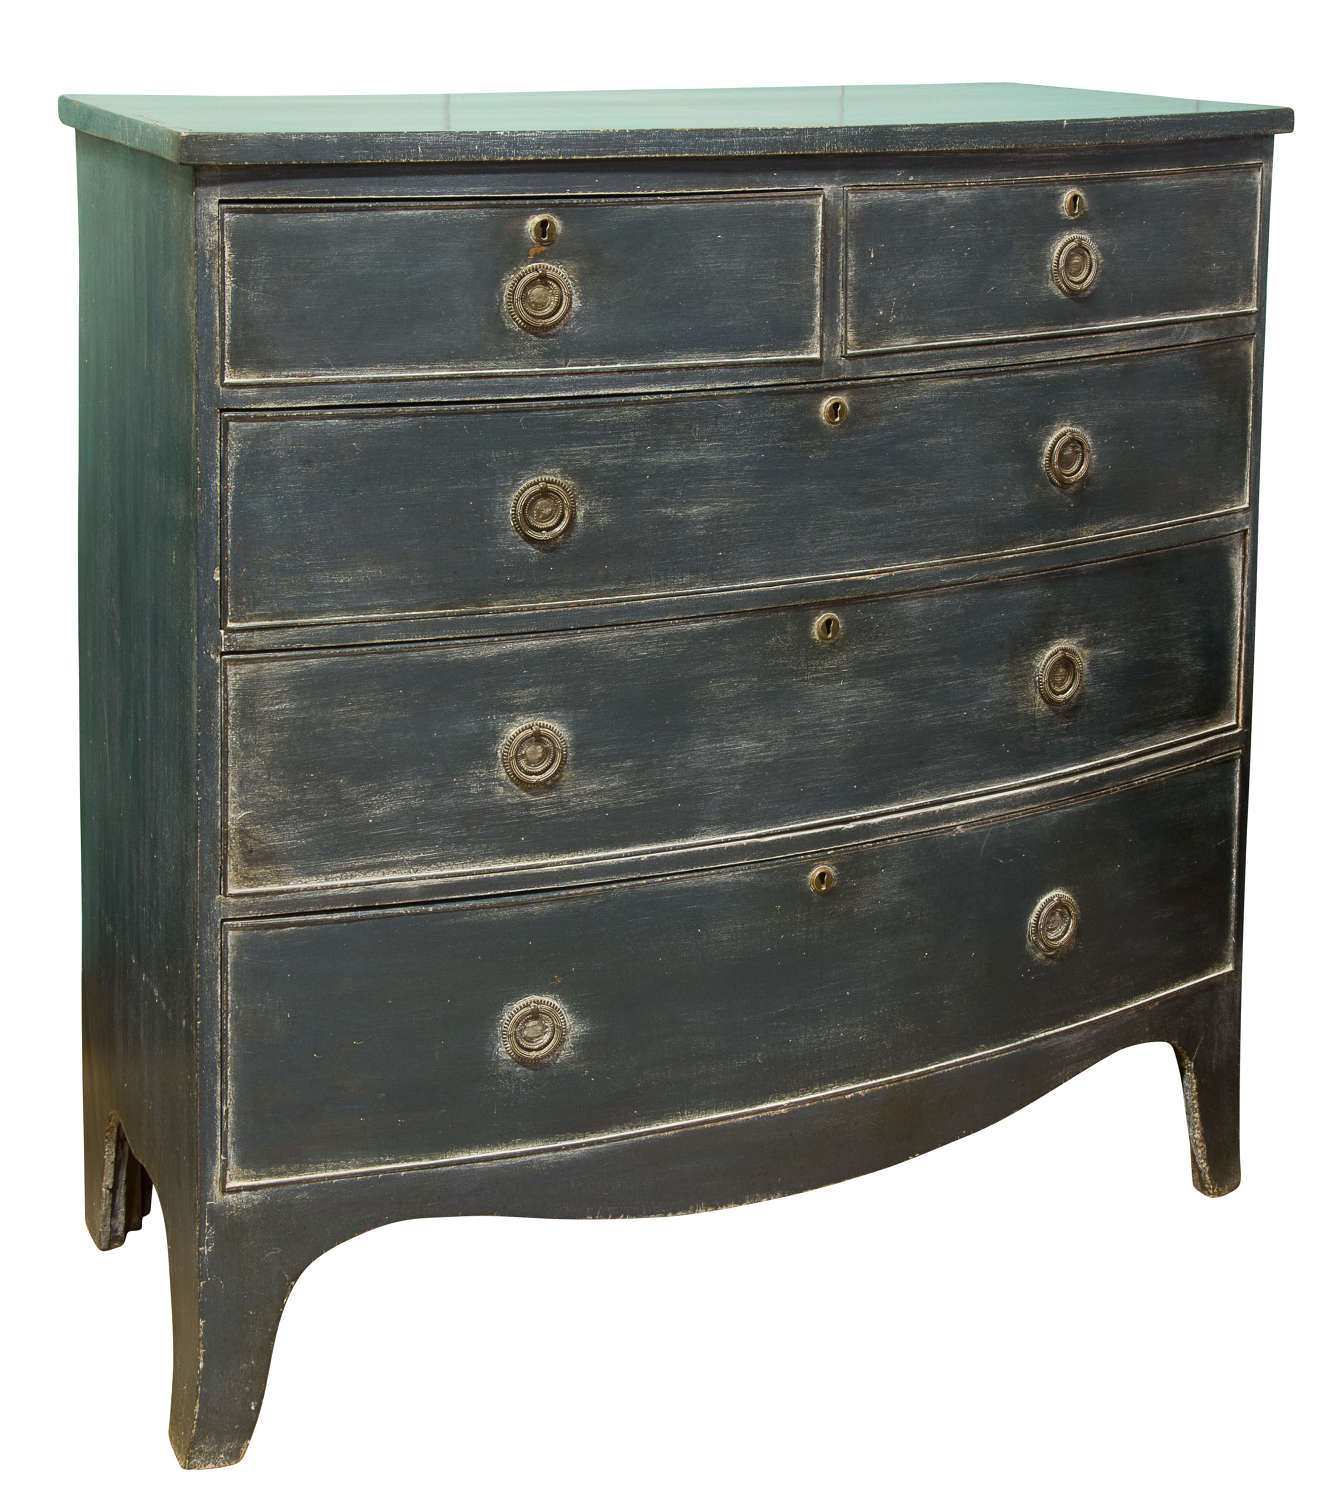 19thc Regency painted bow front chest of drawers